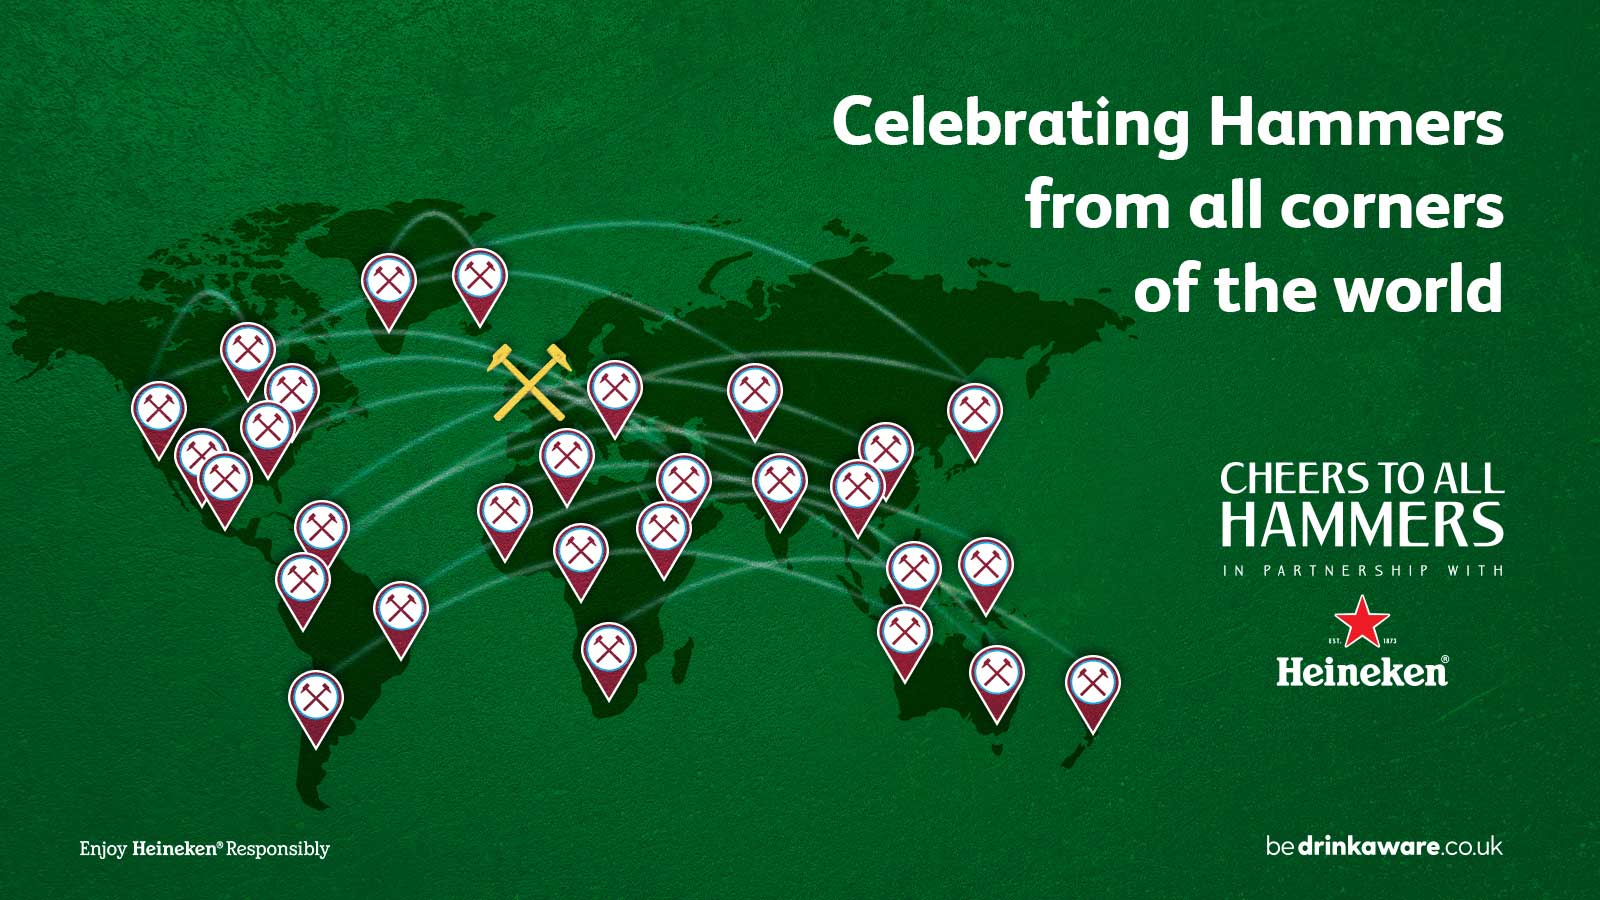 Celebrating Hammers from all corners of the world